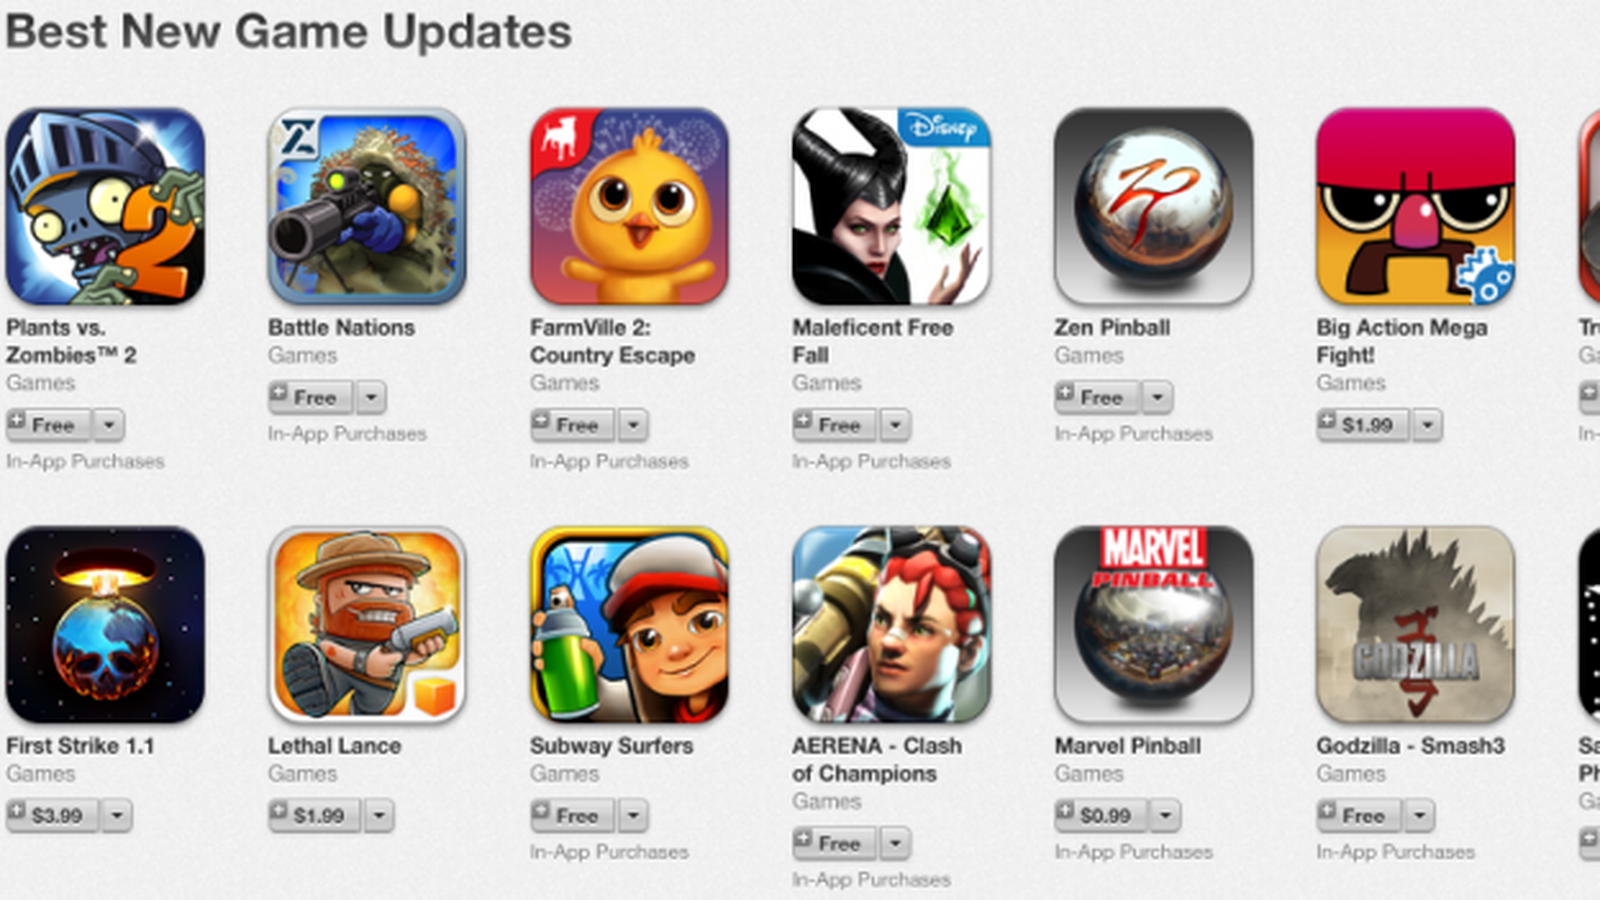 Apple Rolls Out Section for 'Best New Game Updates' on App Store ...